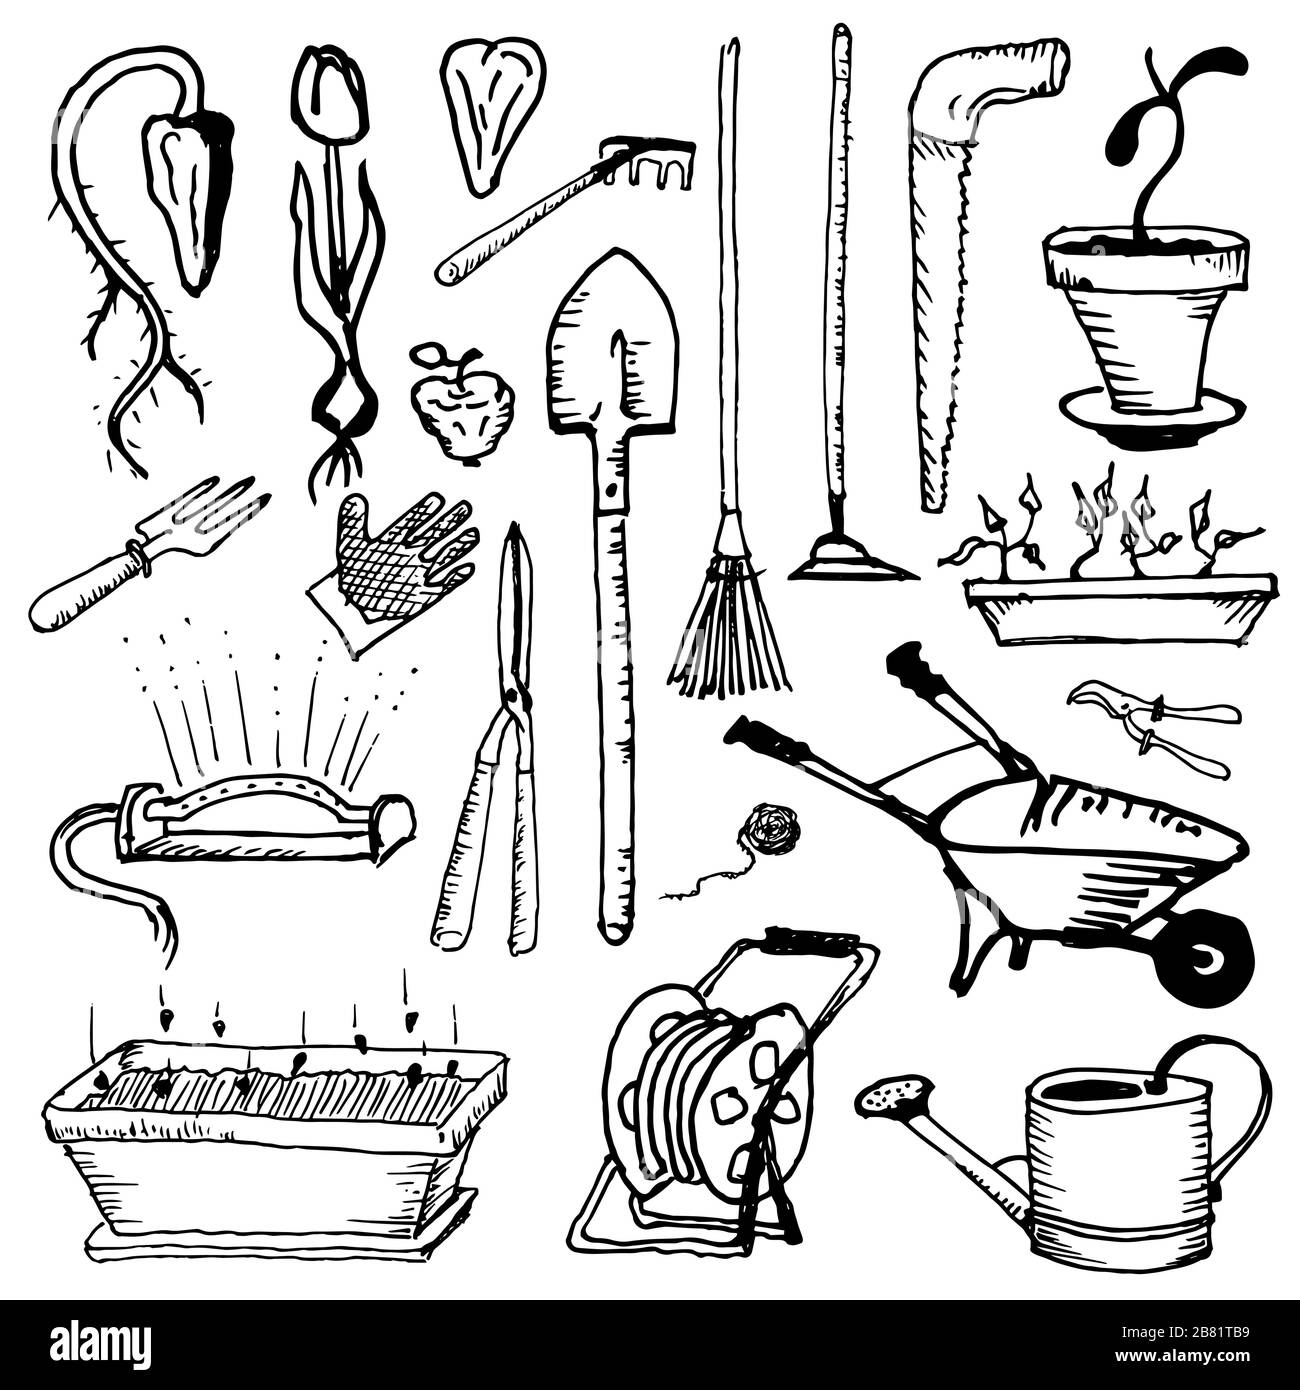 Tools for handling, caring and growing a garden. hobbies of pensioners. Agriculture and hobbies. Stock Vector